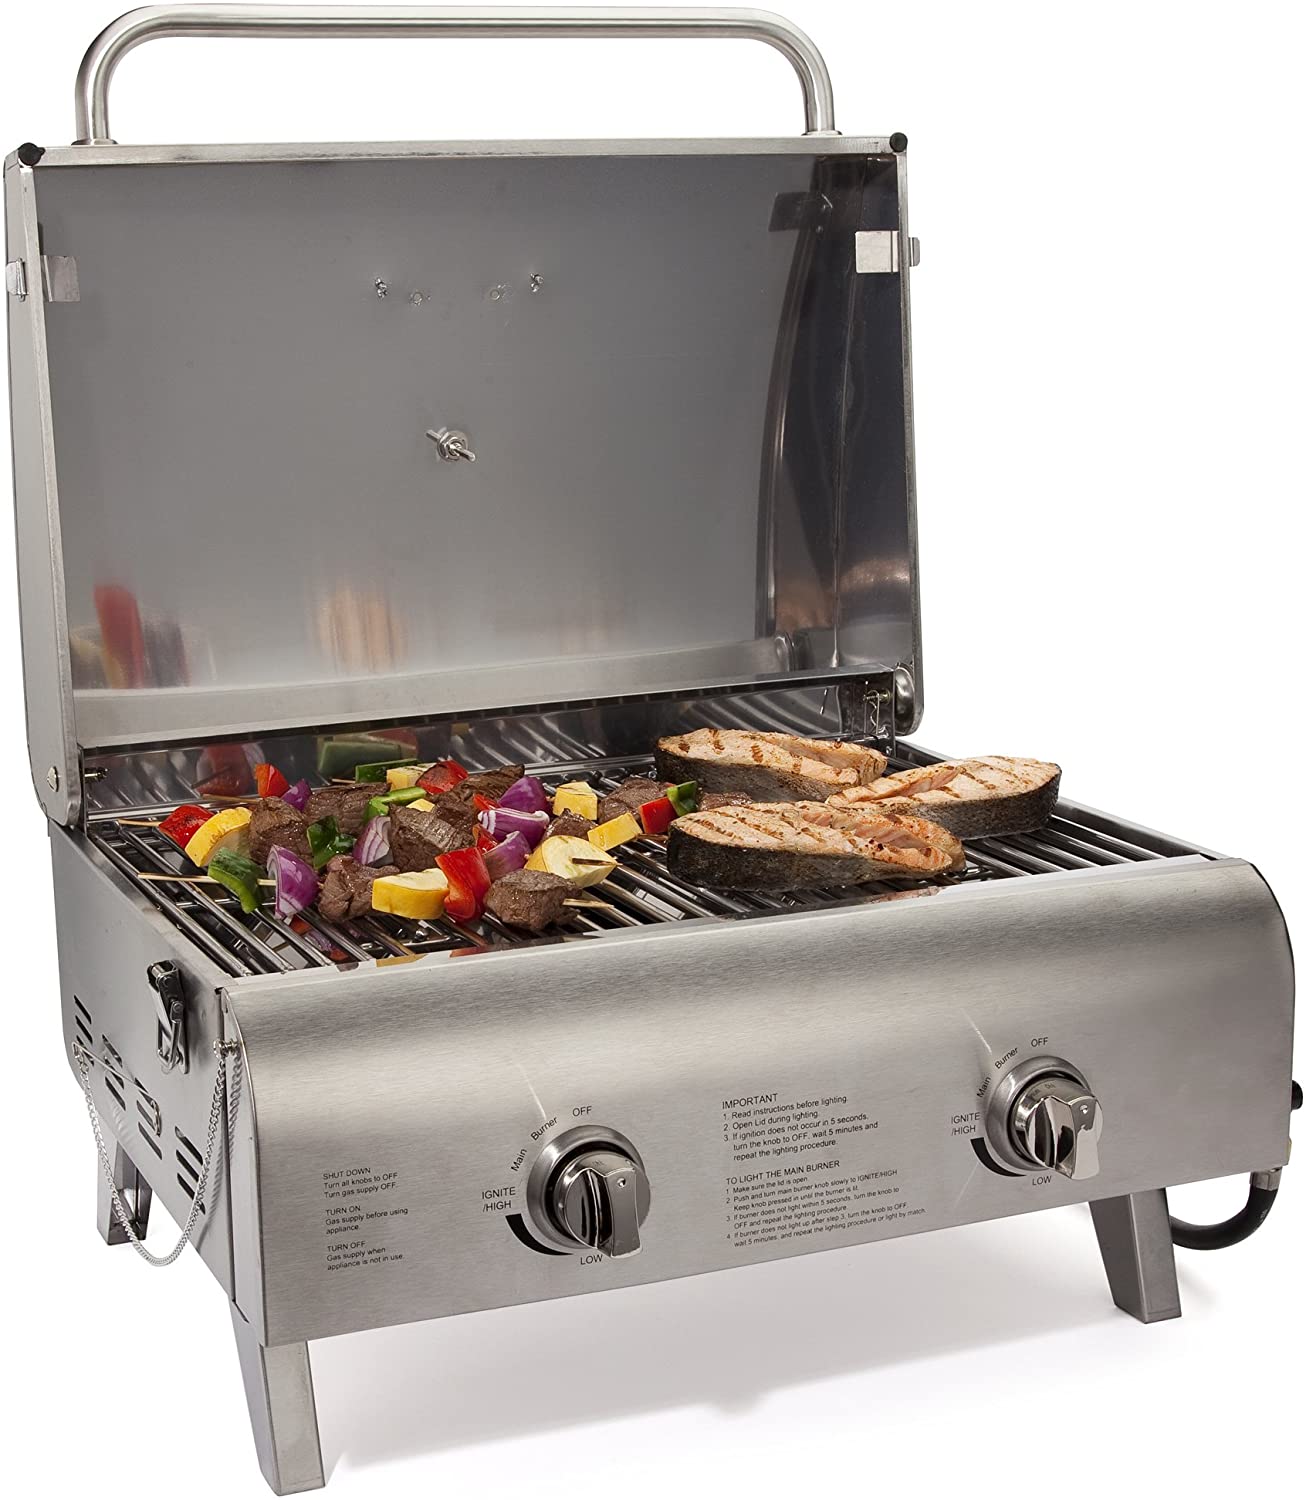 Cuisinart CGG-306 Chef's Style Propane Tabletop Grill, Two-Burner, Stainless Steel - image 2 of 3